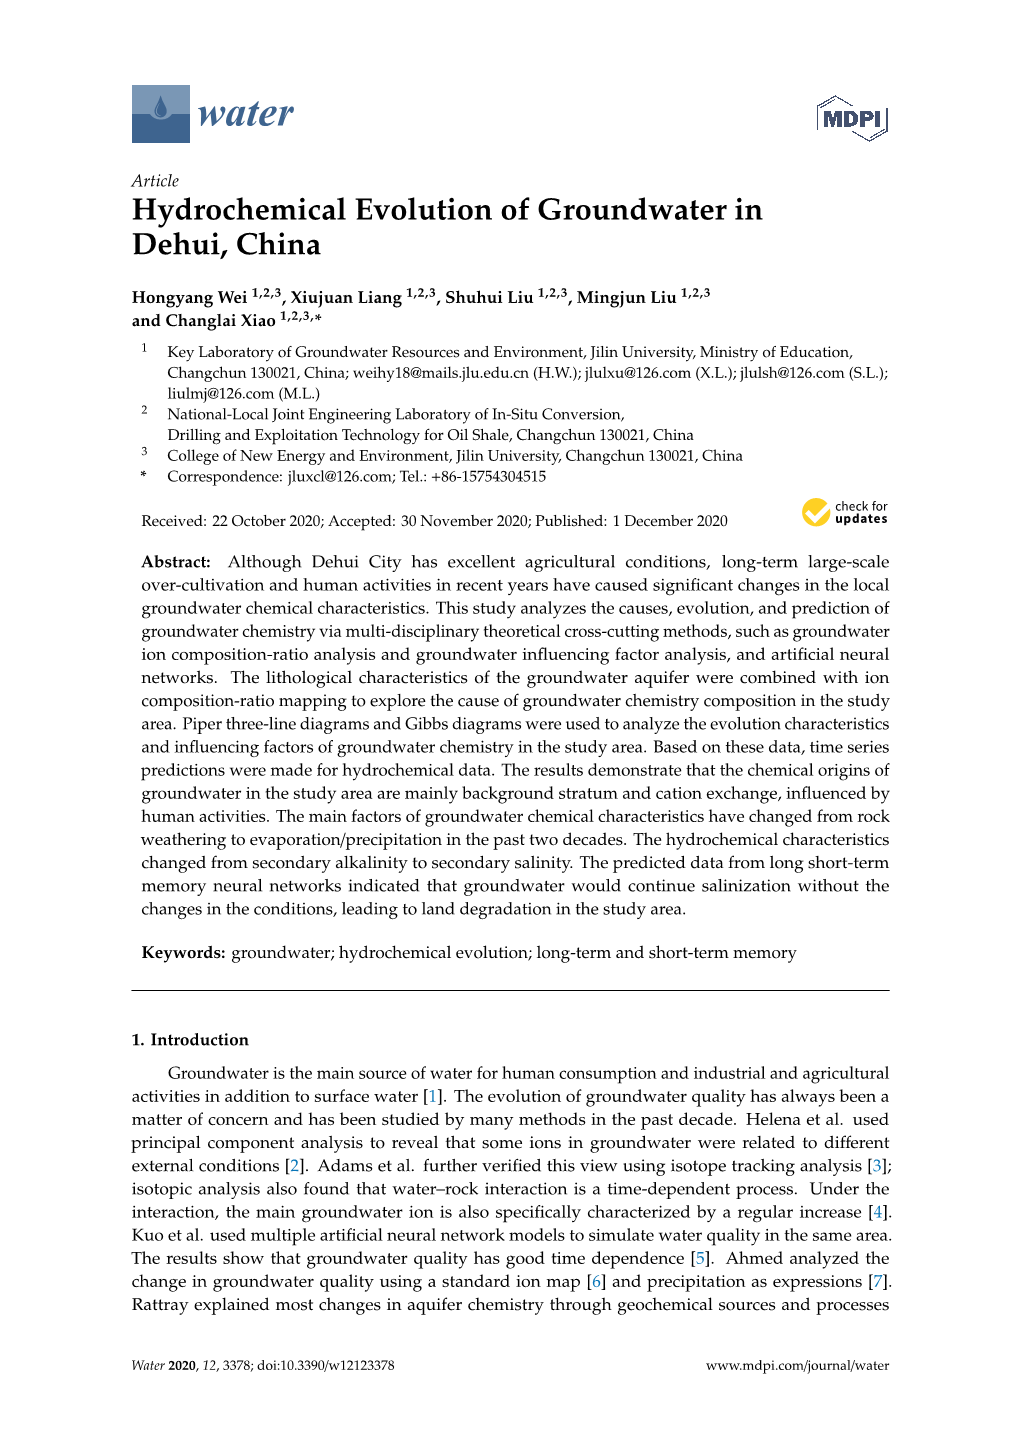 Hydrochemical Evolution of Groundwater in Dehui, China